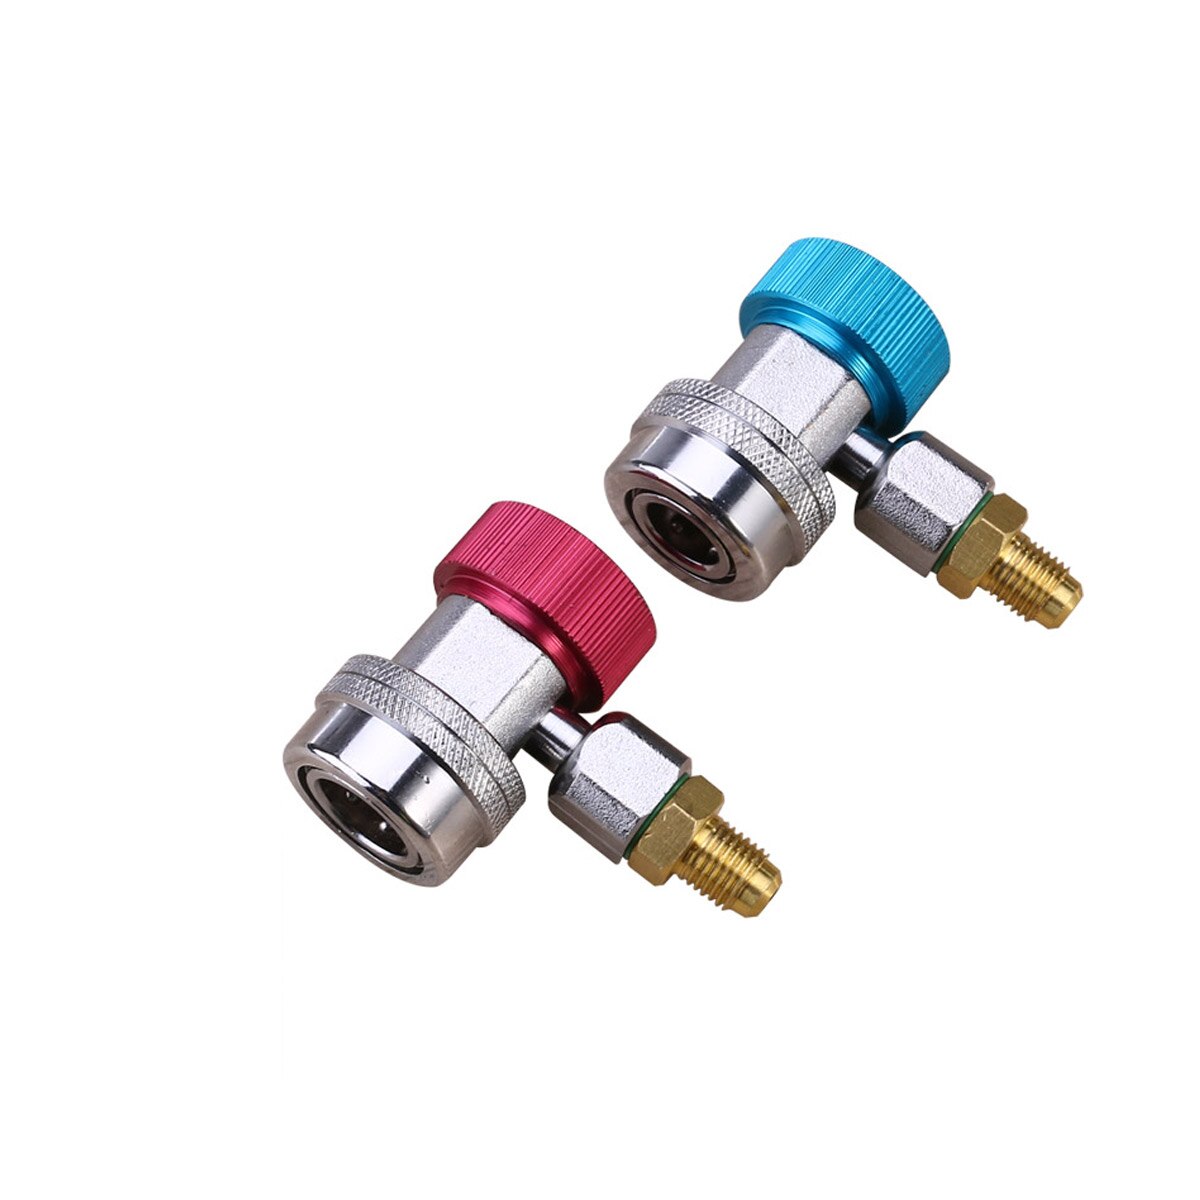 2 stks Auto Airconditioning R134a Snelkoppeling Connector Adapter (Blauw & Rood)